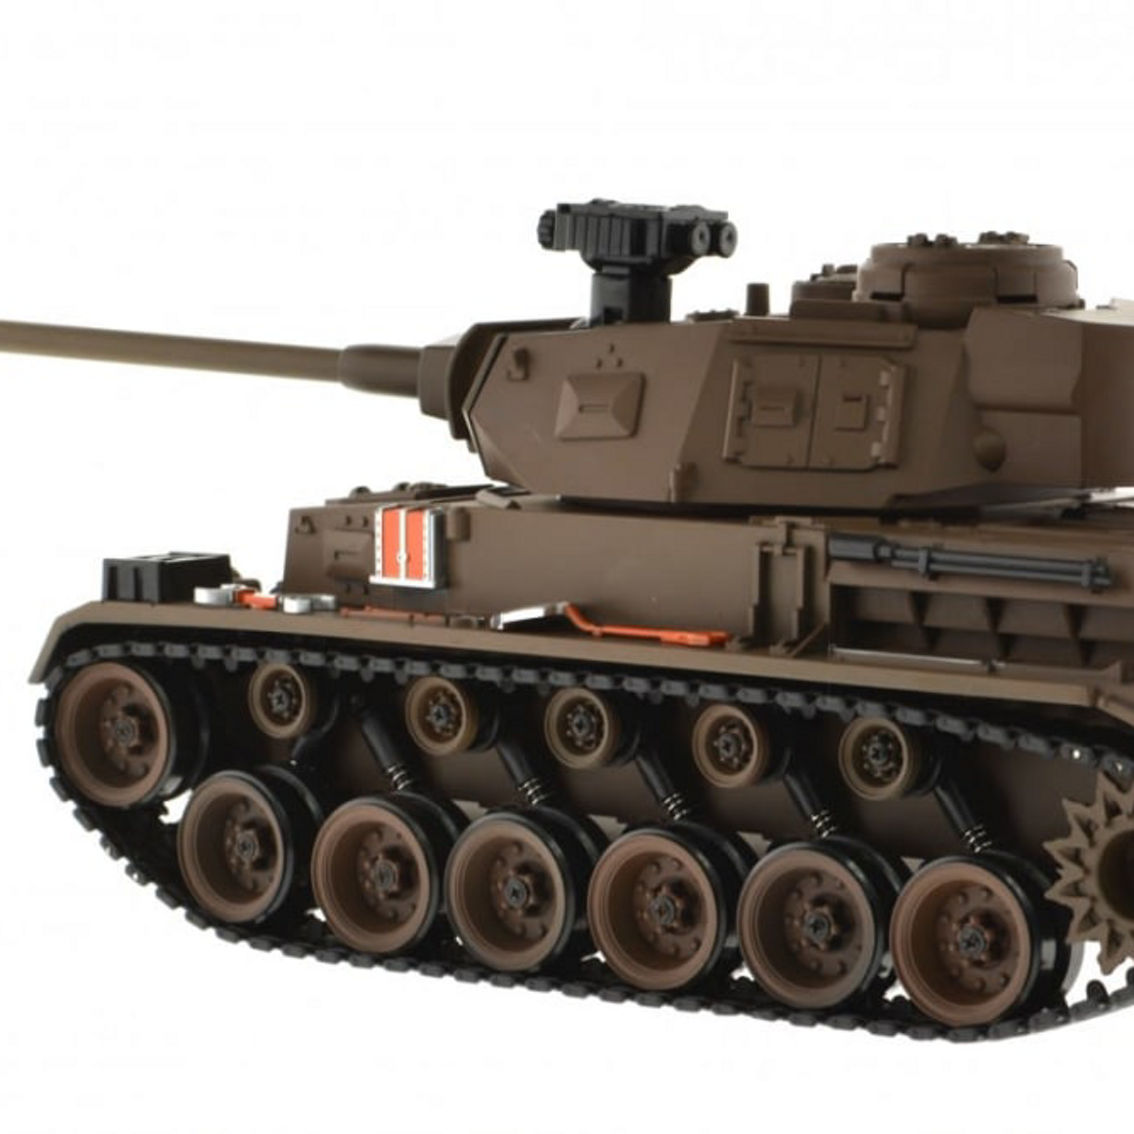 CIS-YZ-826 1:18 scale WWII German Panther tank with lights sound and BB gun - Image 3 of 5